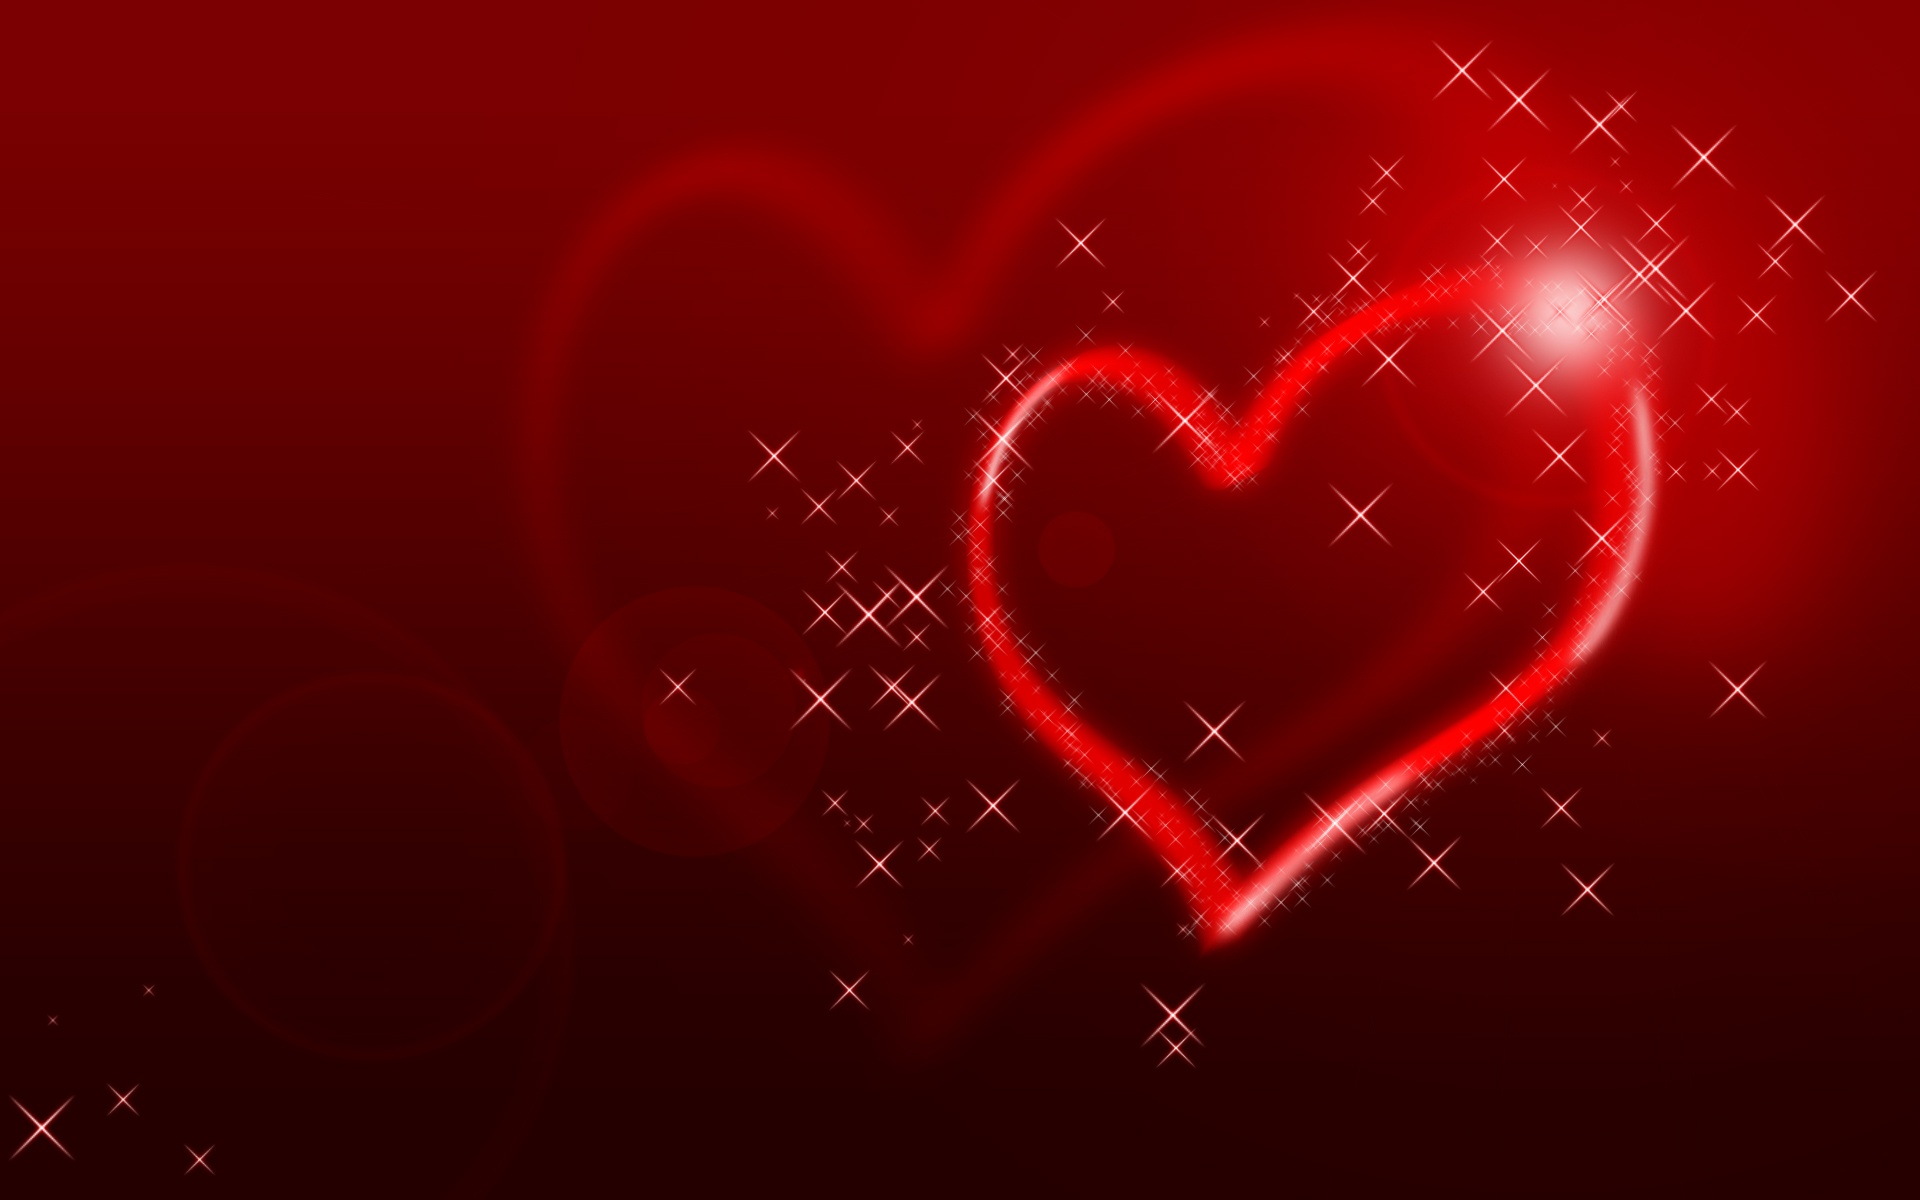 Red Hearts Background Image Amp Pictures Becuo